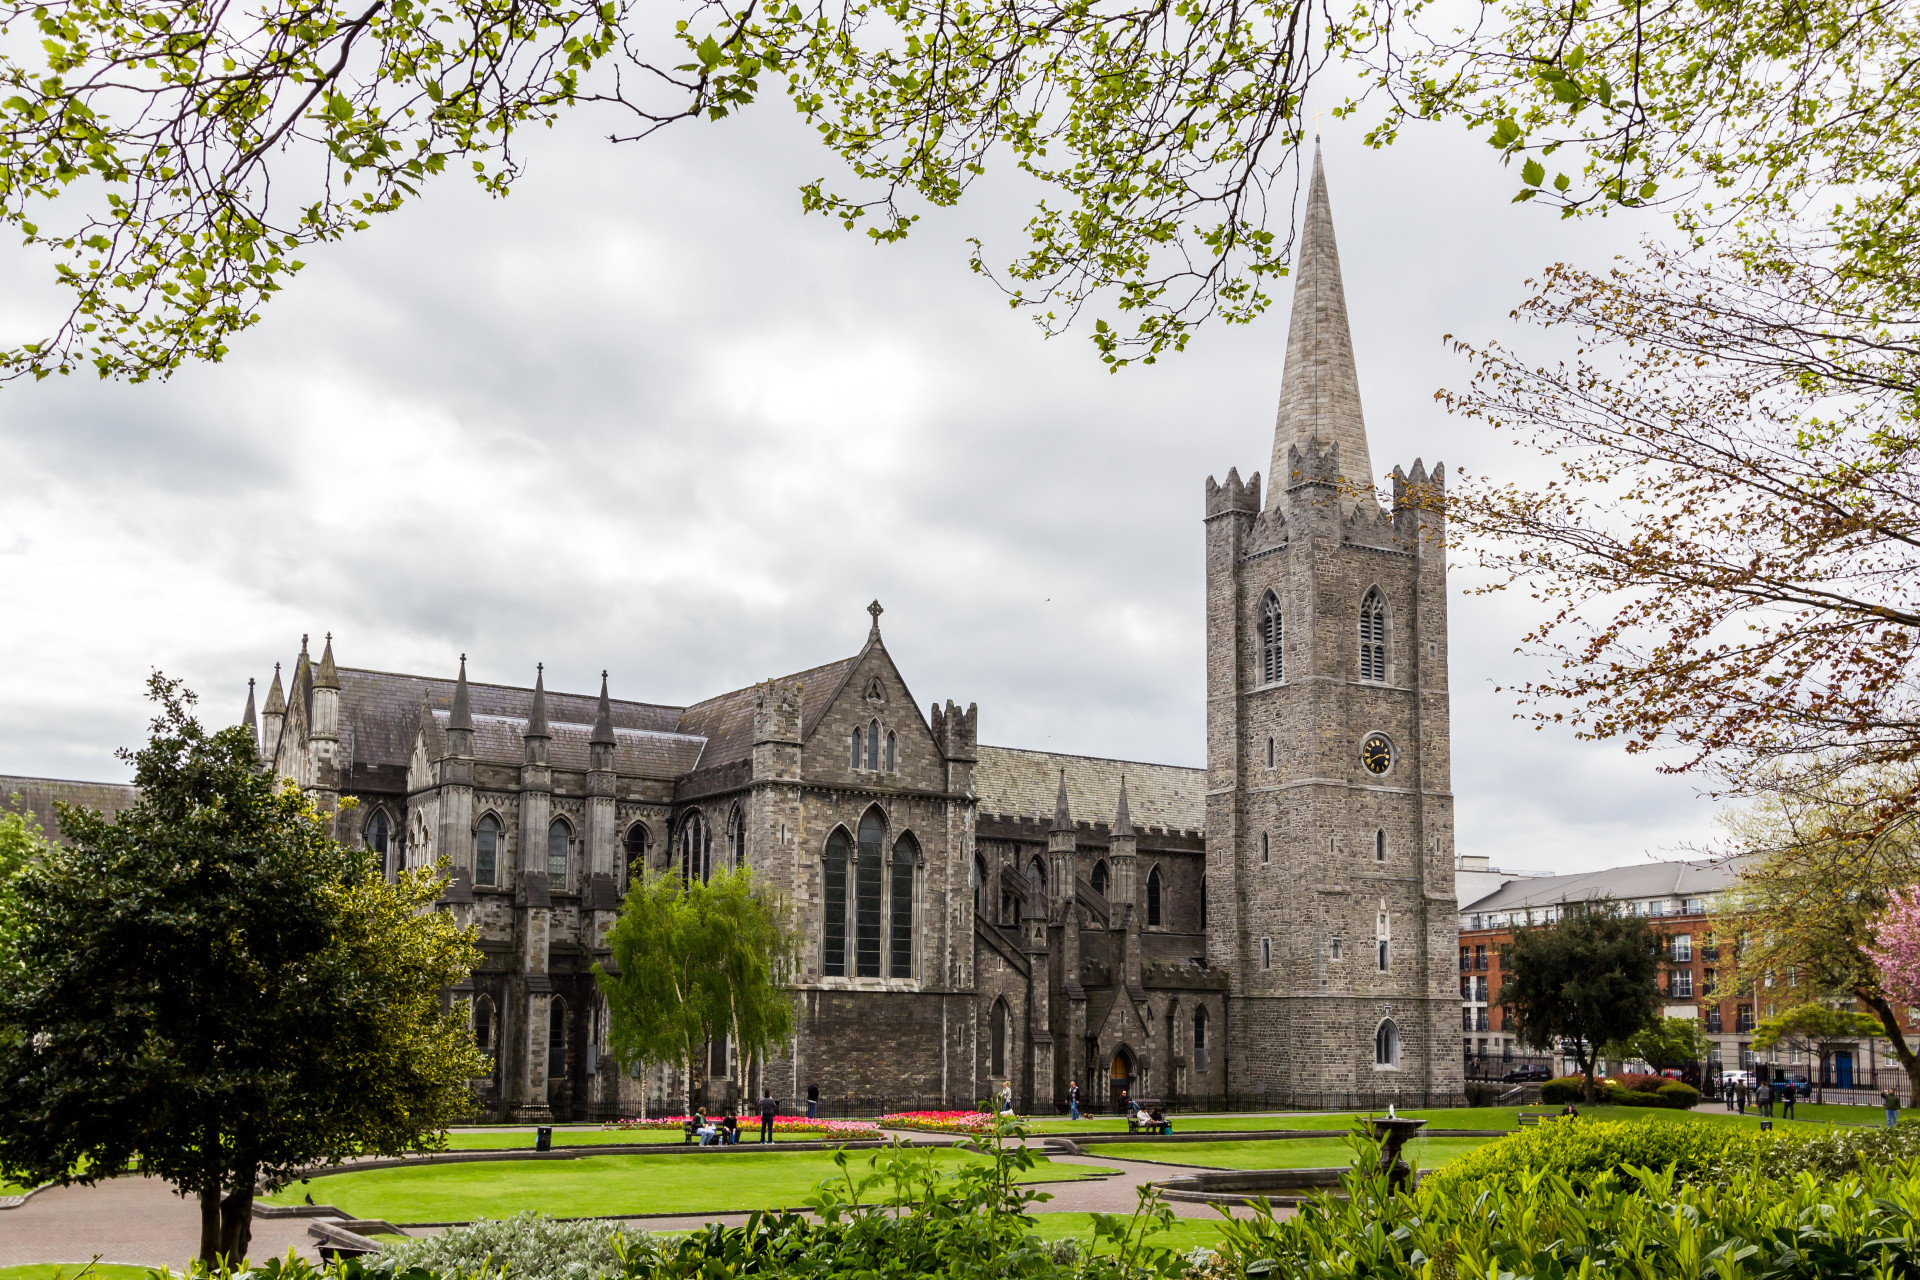 If you're nearby, see if you can find St. Patrick's Cathedral, dedicated to Ireland's patron saint.<p>You may also like:<a href="https://www.starsinsider.com/n/268147?utm_source=msn.com&utm_medium=display&utm_campaign=referral_description&utm_content=208346v2en-sg"> The most shocking celebrity scandals of our time</a></p>